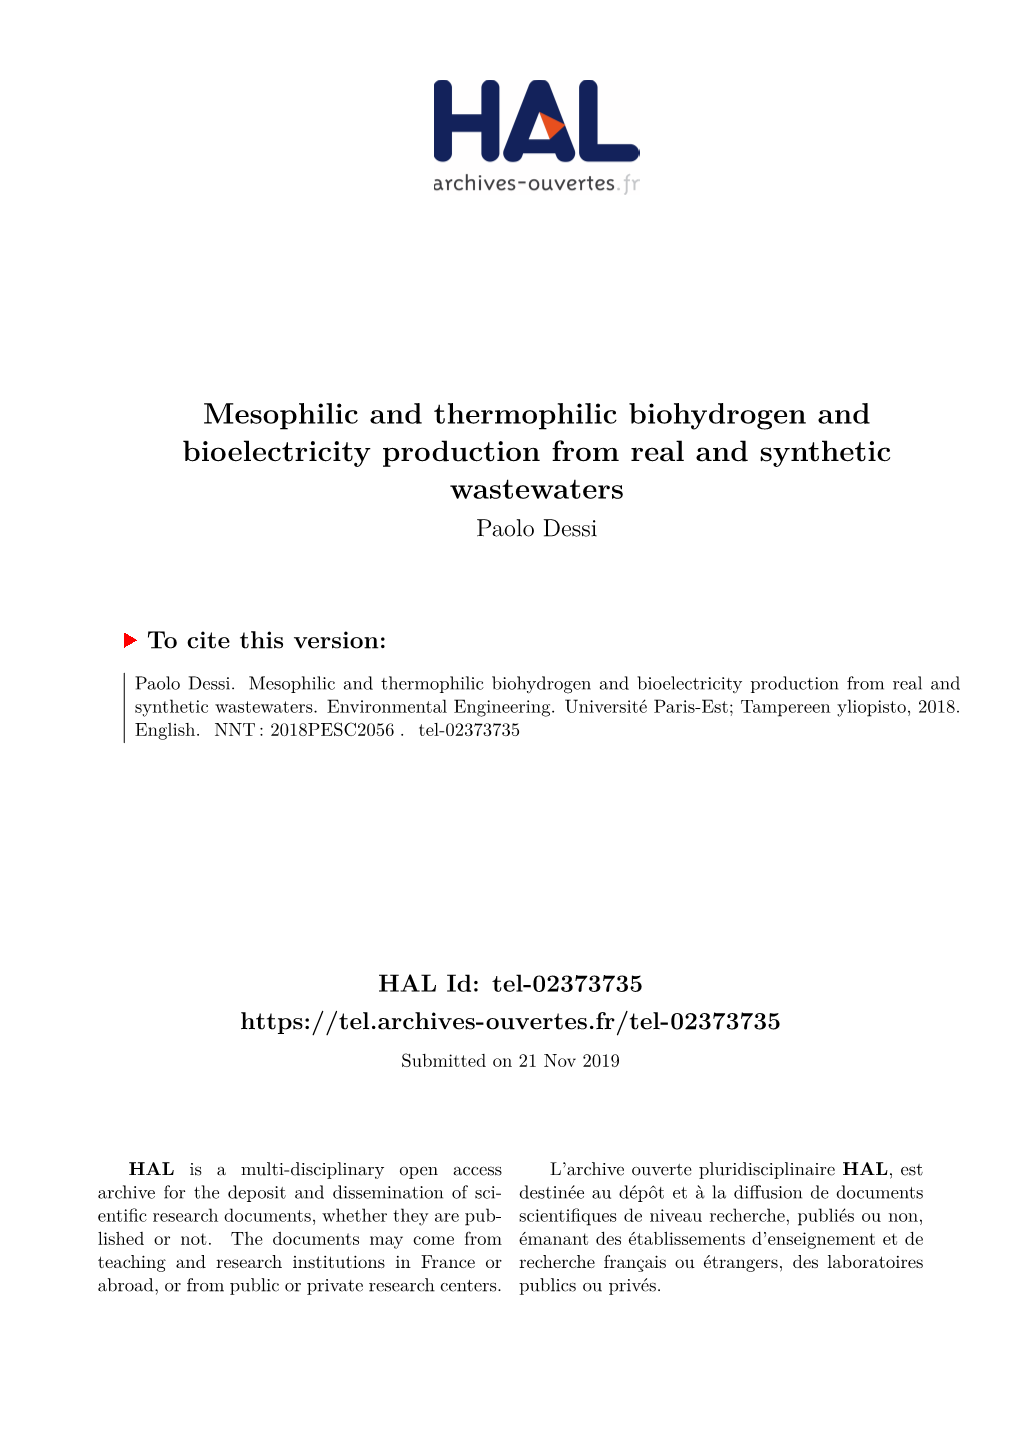 Mesophilic and Thermophilic Biohydrogen and Bioelectricity Production from Real and Synthetic Wastewaters Paolo Dessi